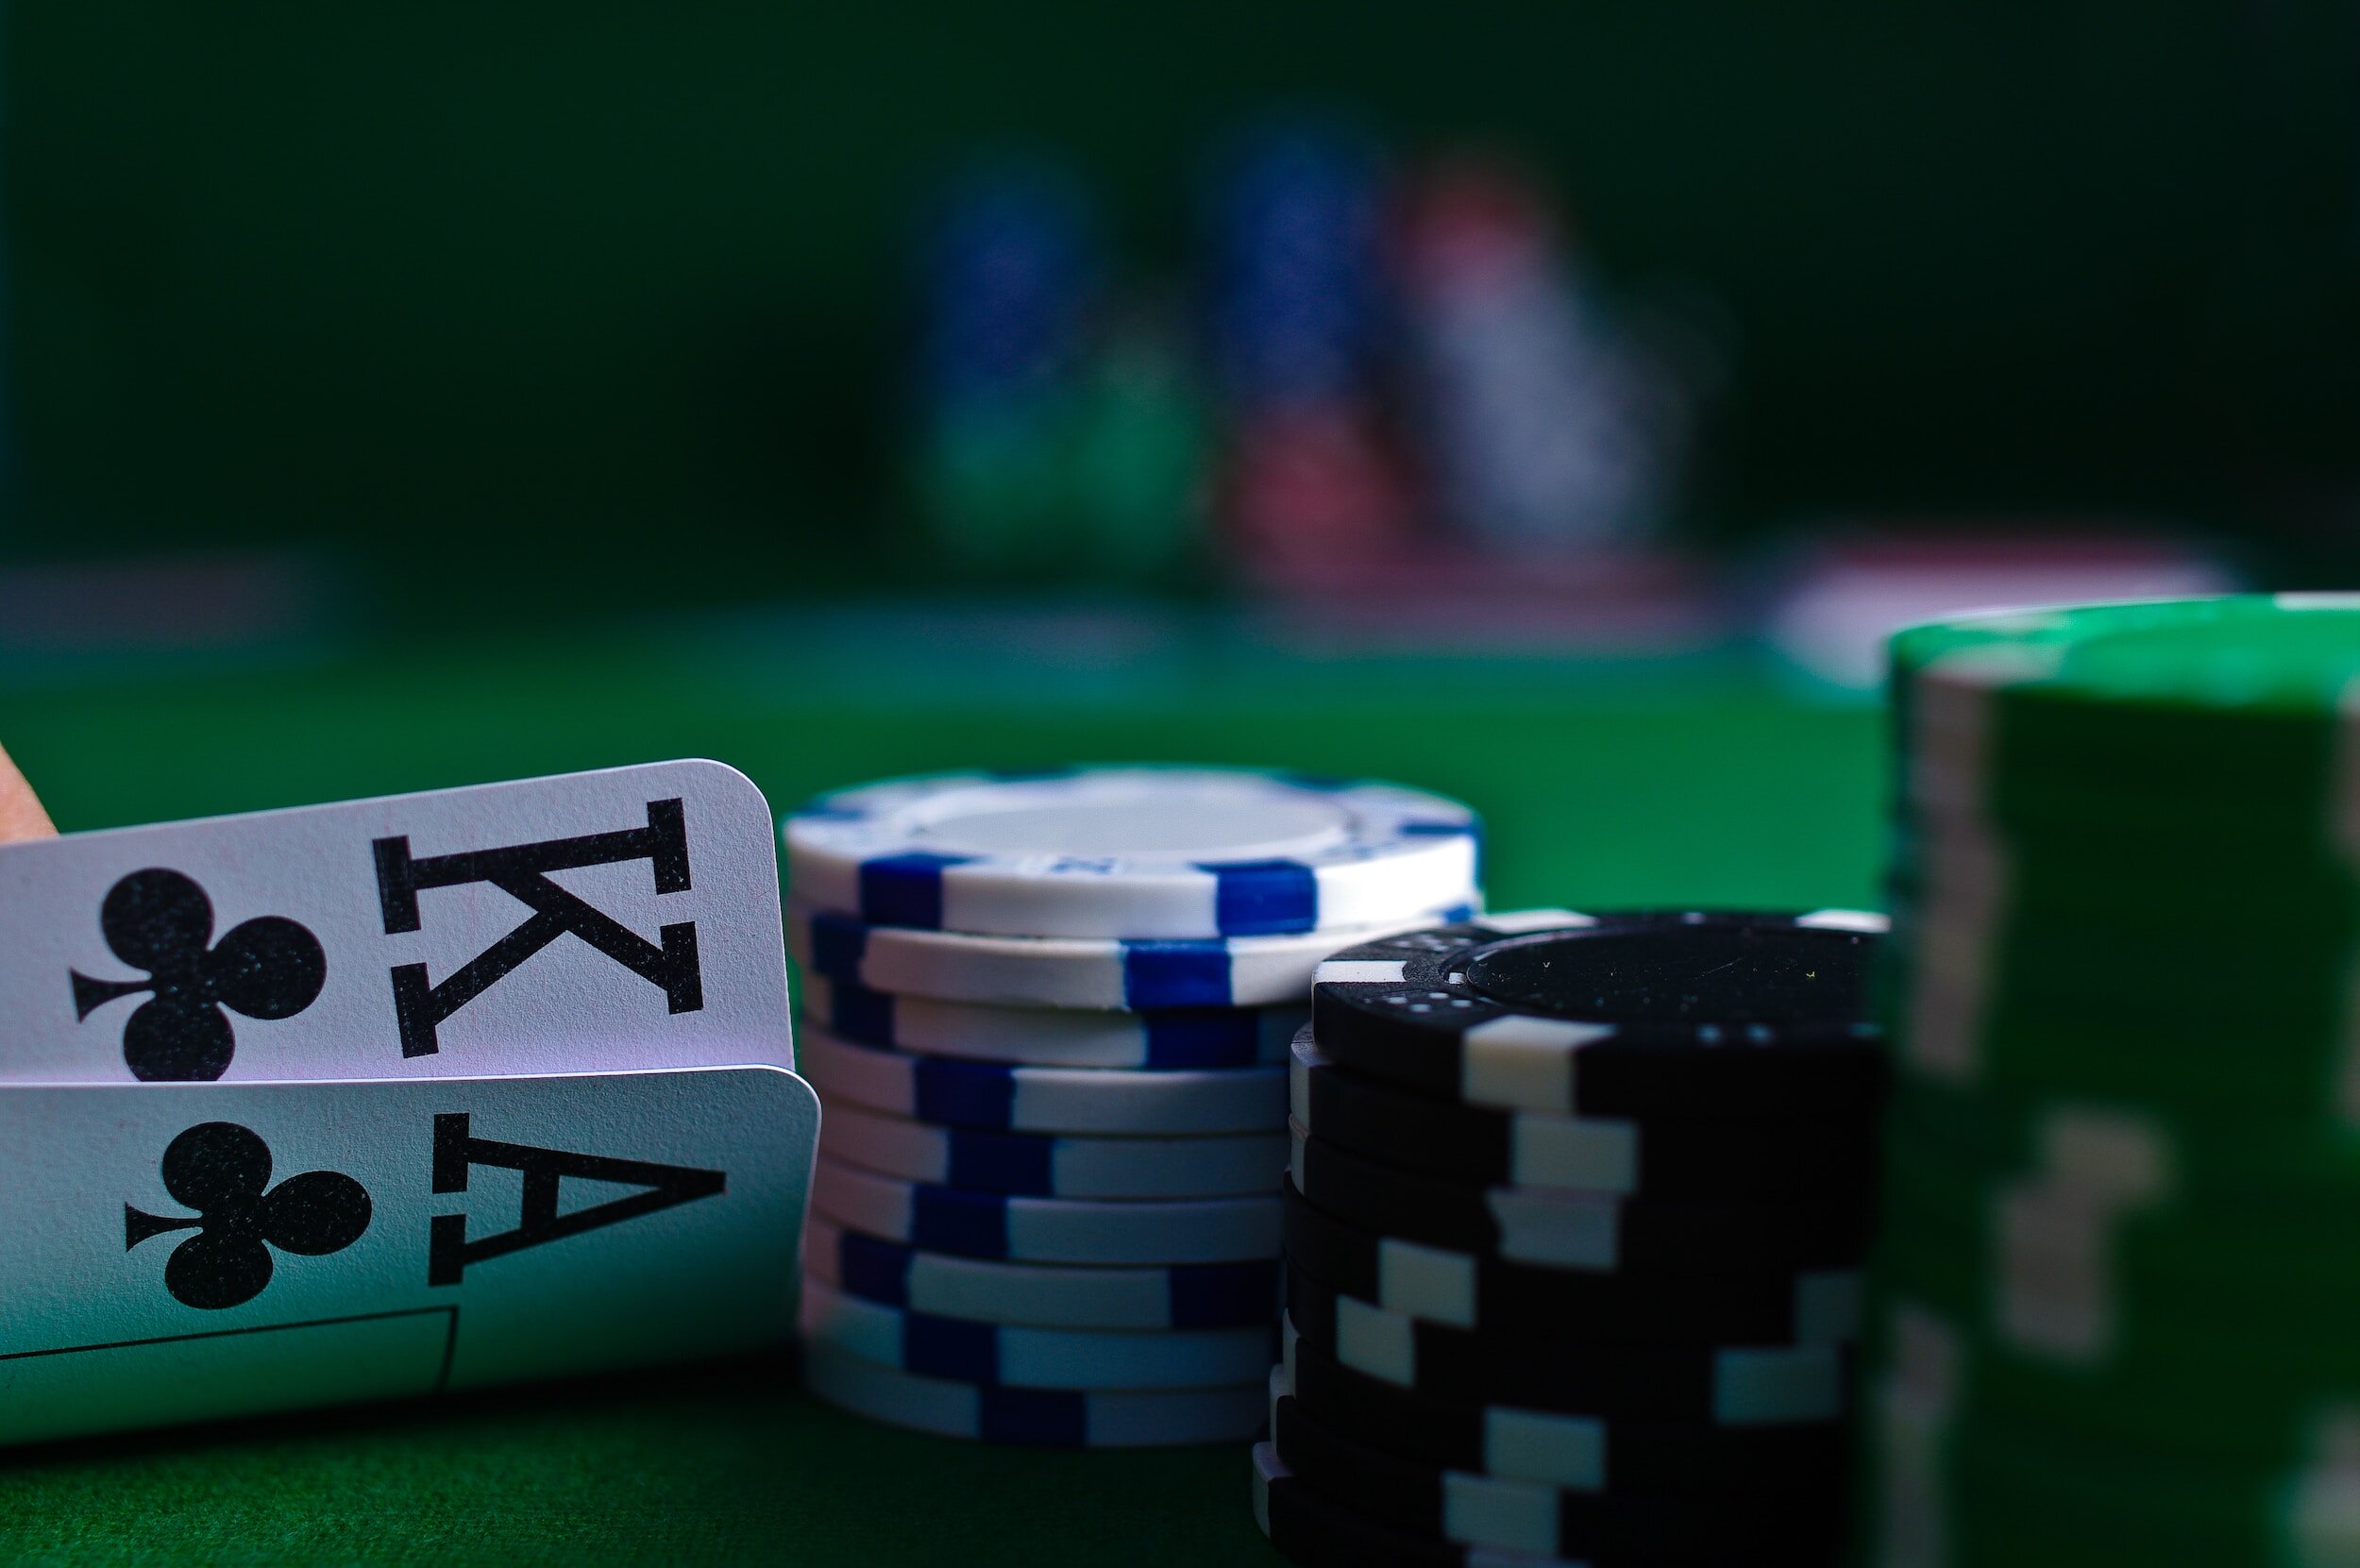 20 Places To Get Deals On online casino